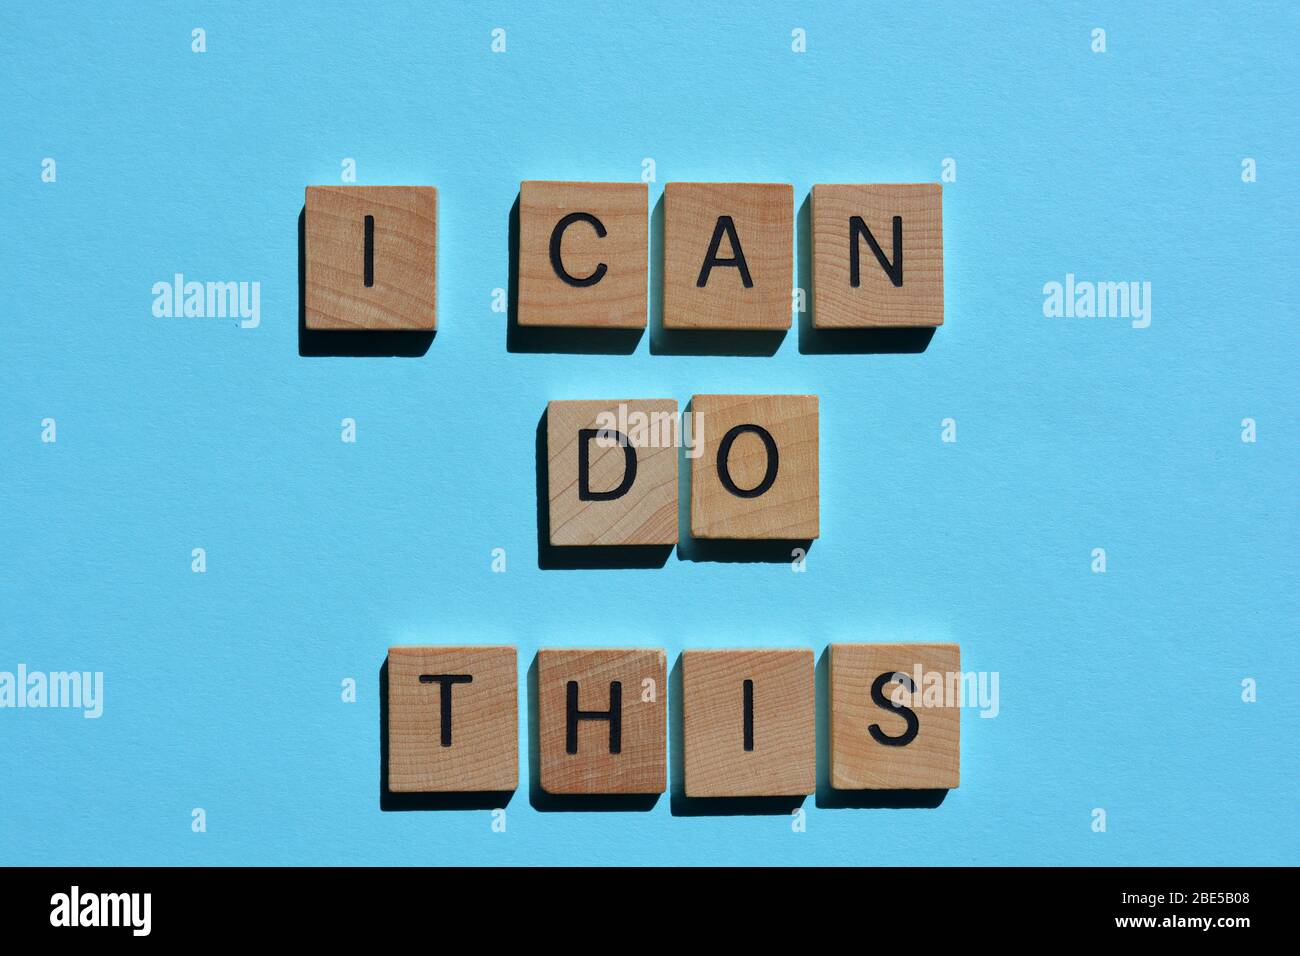 I Can Do This, words on blue background Stock Photo